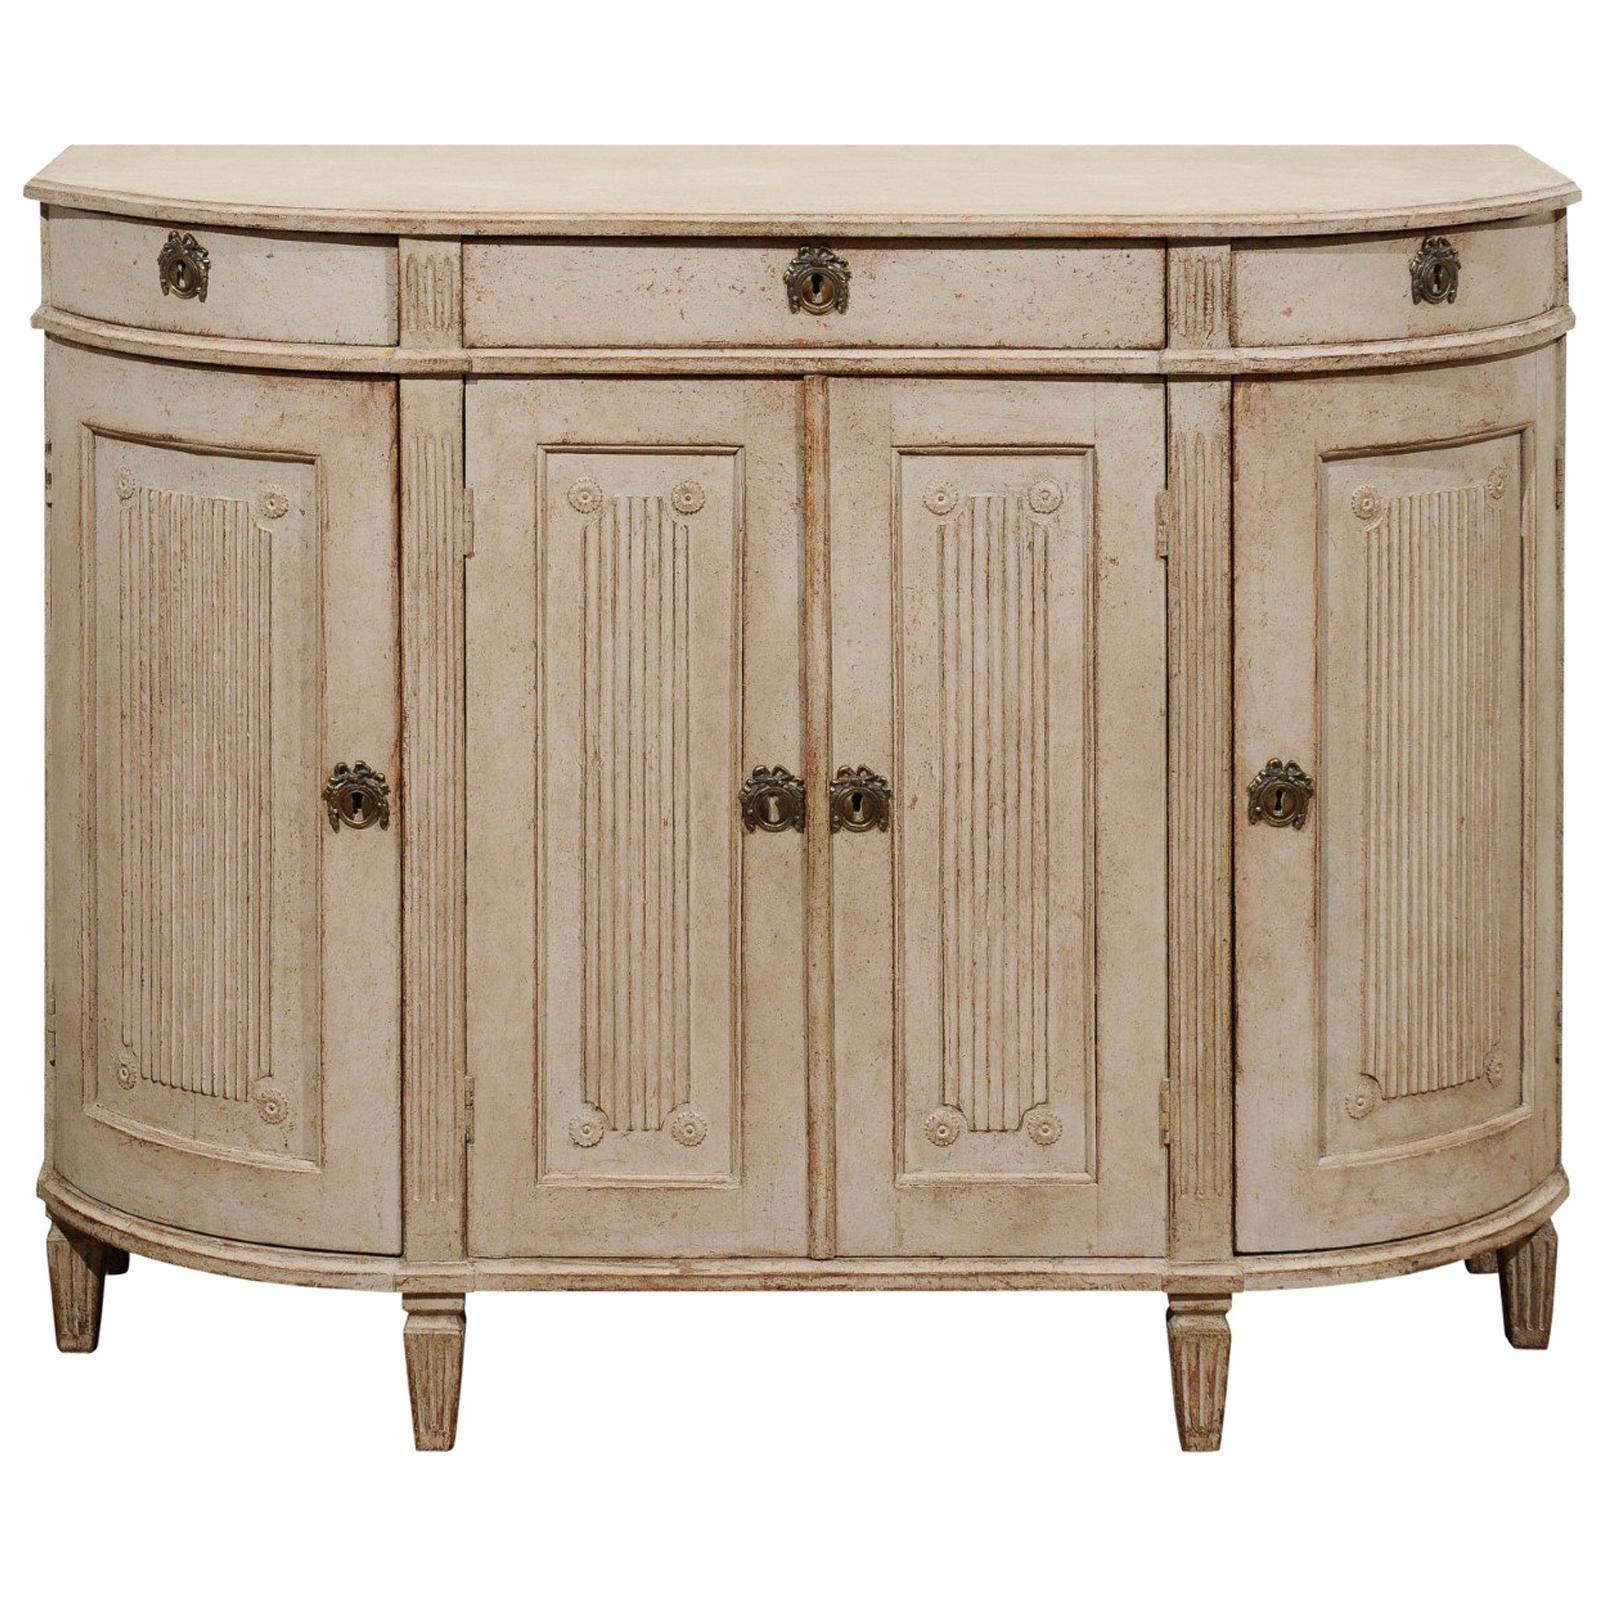 Swedish Gustavian Style 1850s Painted Demilune Sideboard with Reeded Motifs